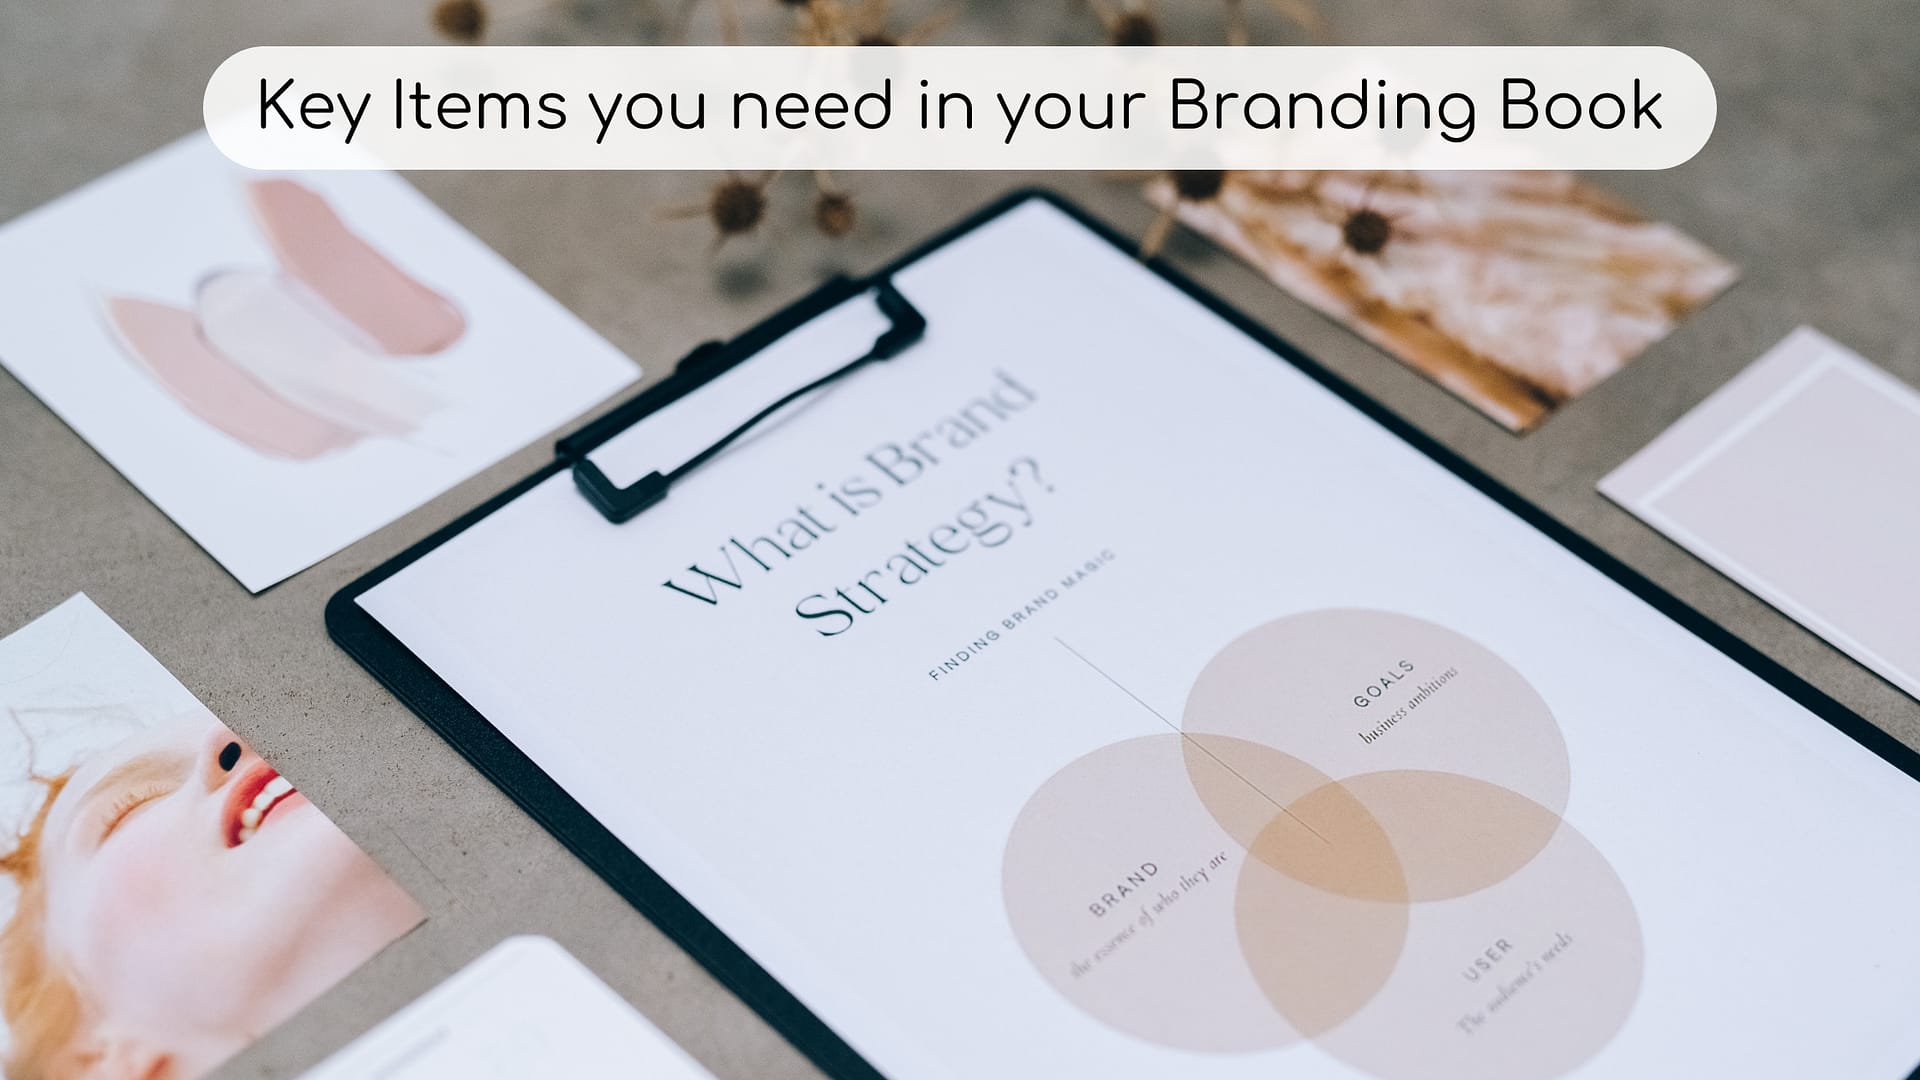 Key Items you need in your Branding Book